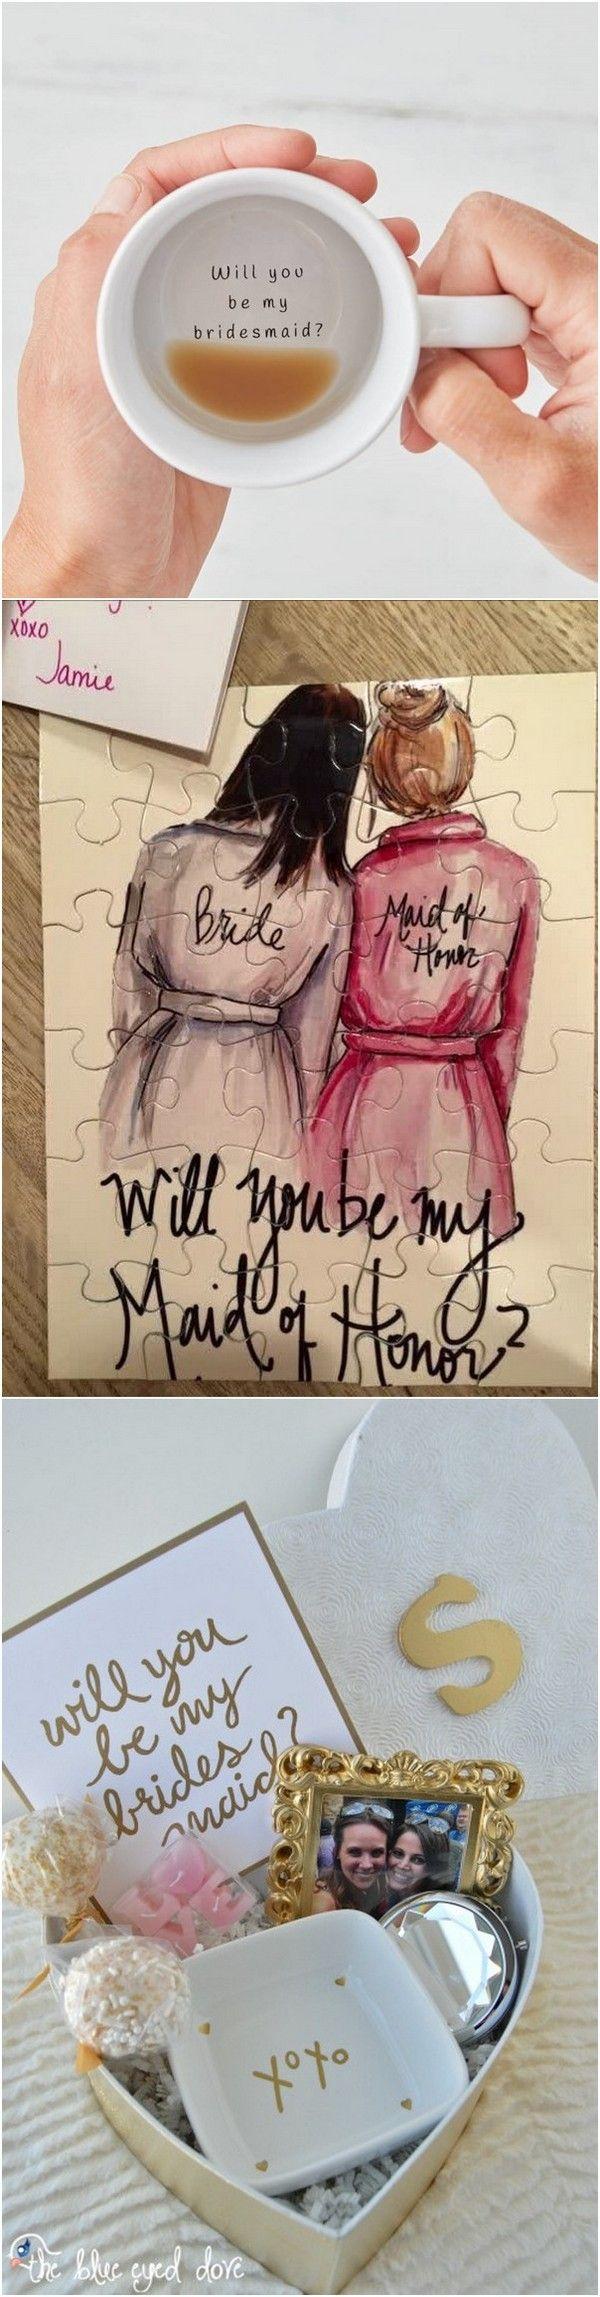 Mariage - 10 Creative Ways To Ask “Will You Be My Bridesmaid?”